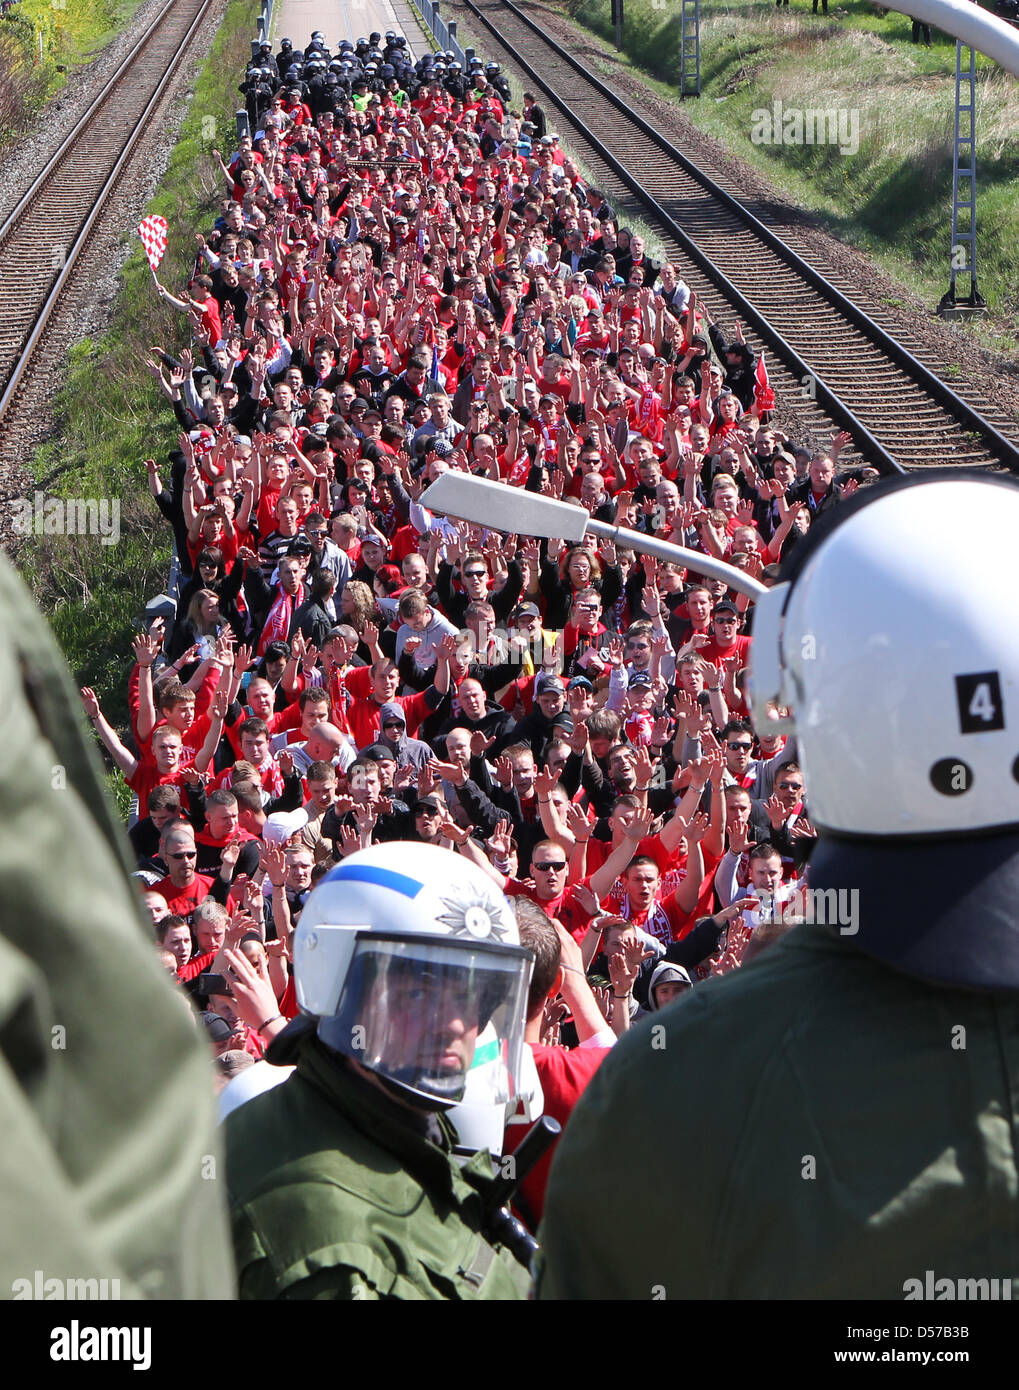 With a massive contingent, the police meet the 680 Cottbus' fans, which arrived with a train previous to German 2nd Bundesliga match FC Hansa Rostock vs Energie Cottbus at DKB-Arena in Rostock, Germany, 02 May 2010. The Police and the German Soccer Association (DFB) have classified the match between FC Hansa Rostock and Energie Cottbus as a high risk. Photo: BERND WUESTNECK Stock Photo